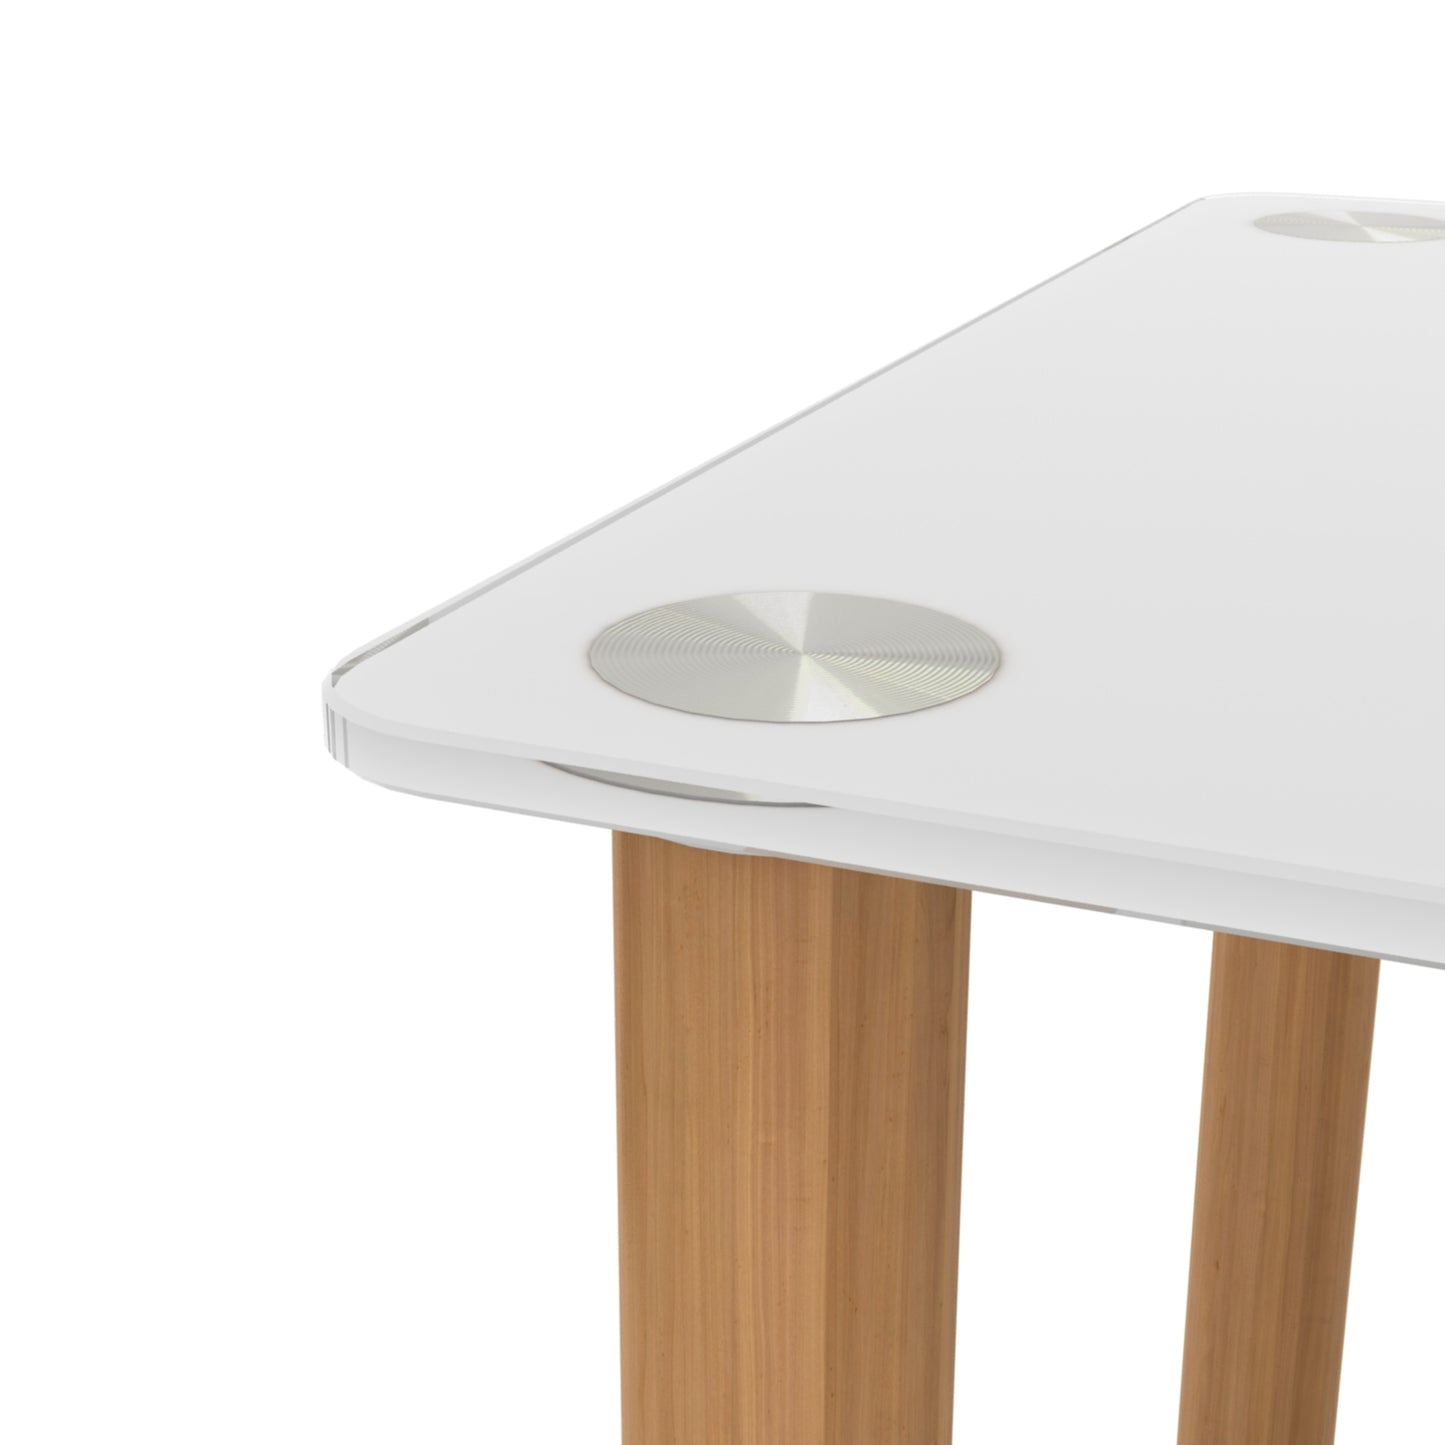 1. OakSide Table2. SpaceX Table